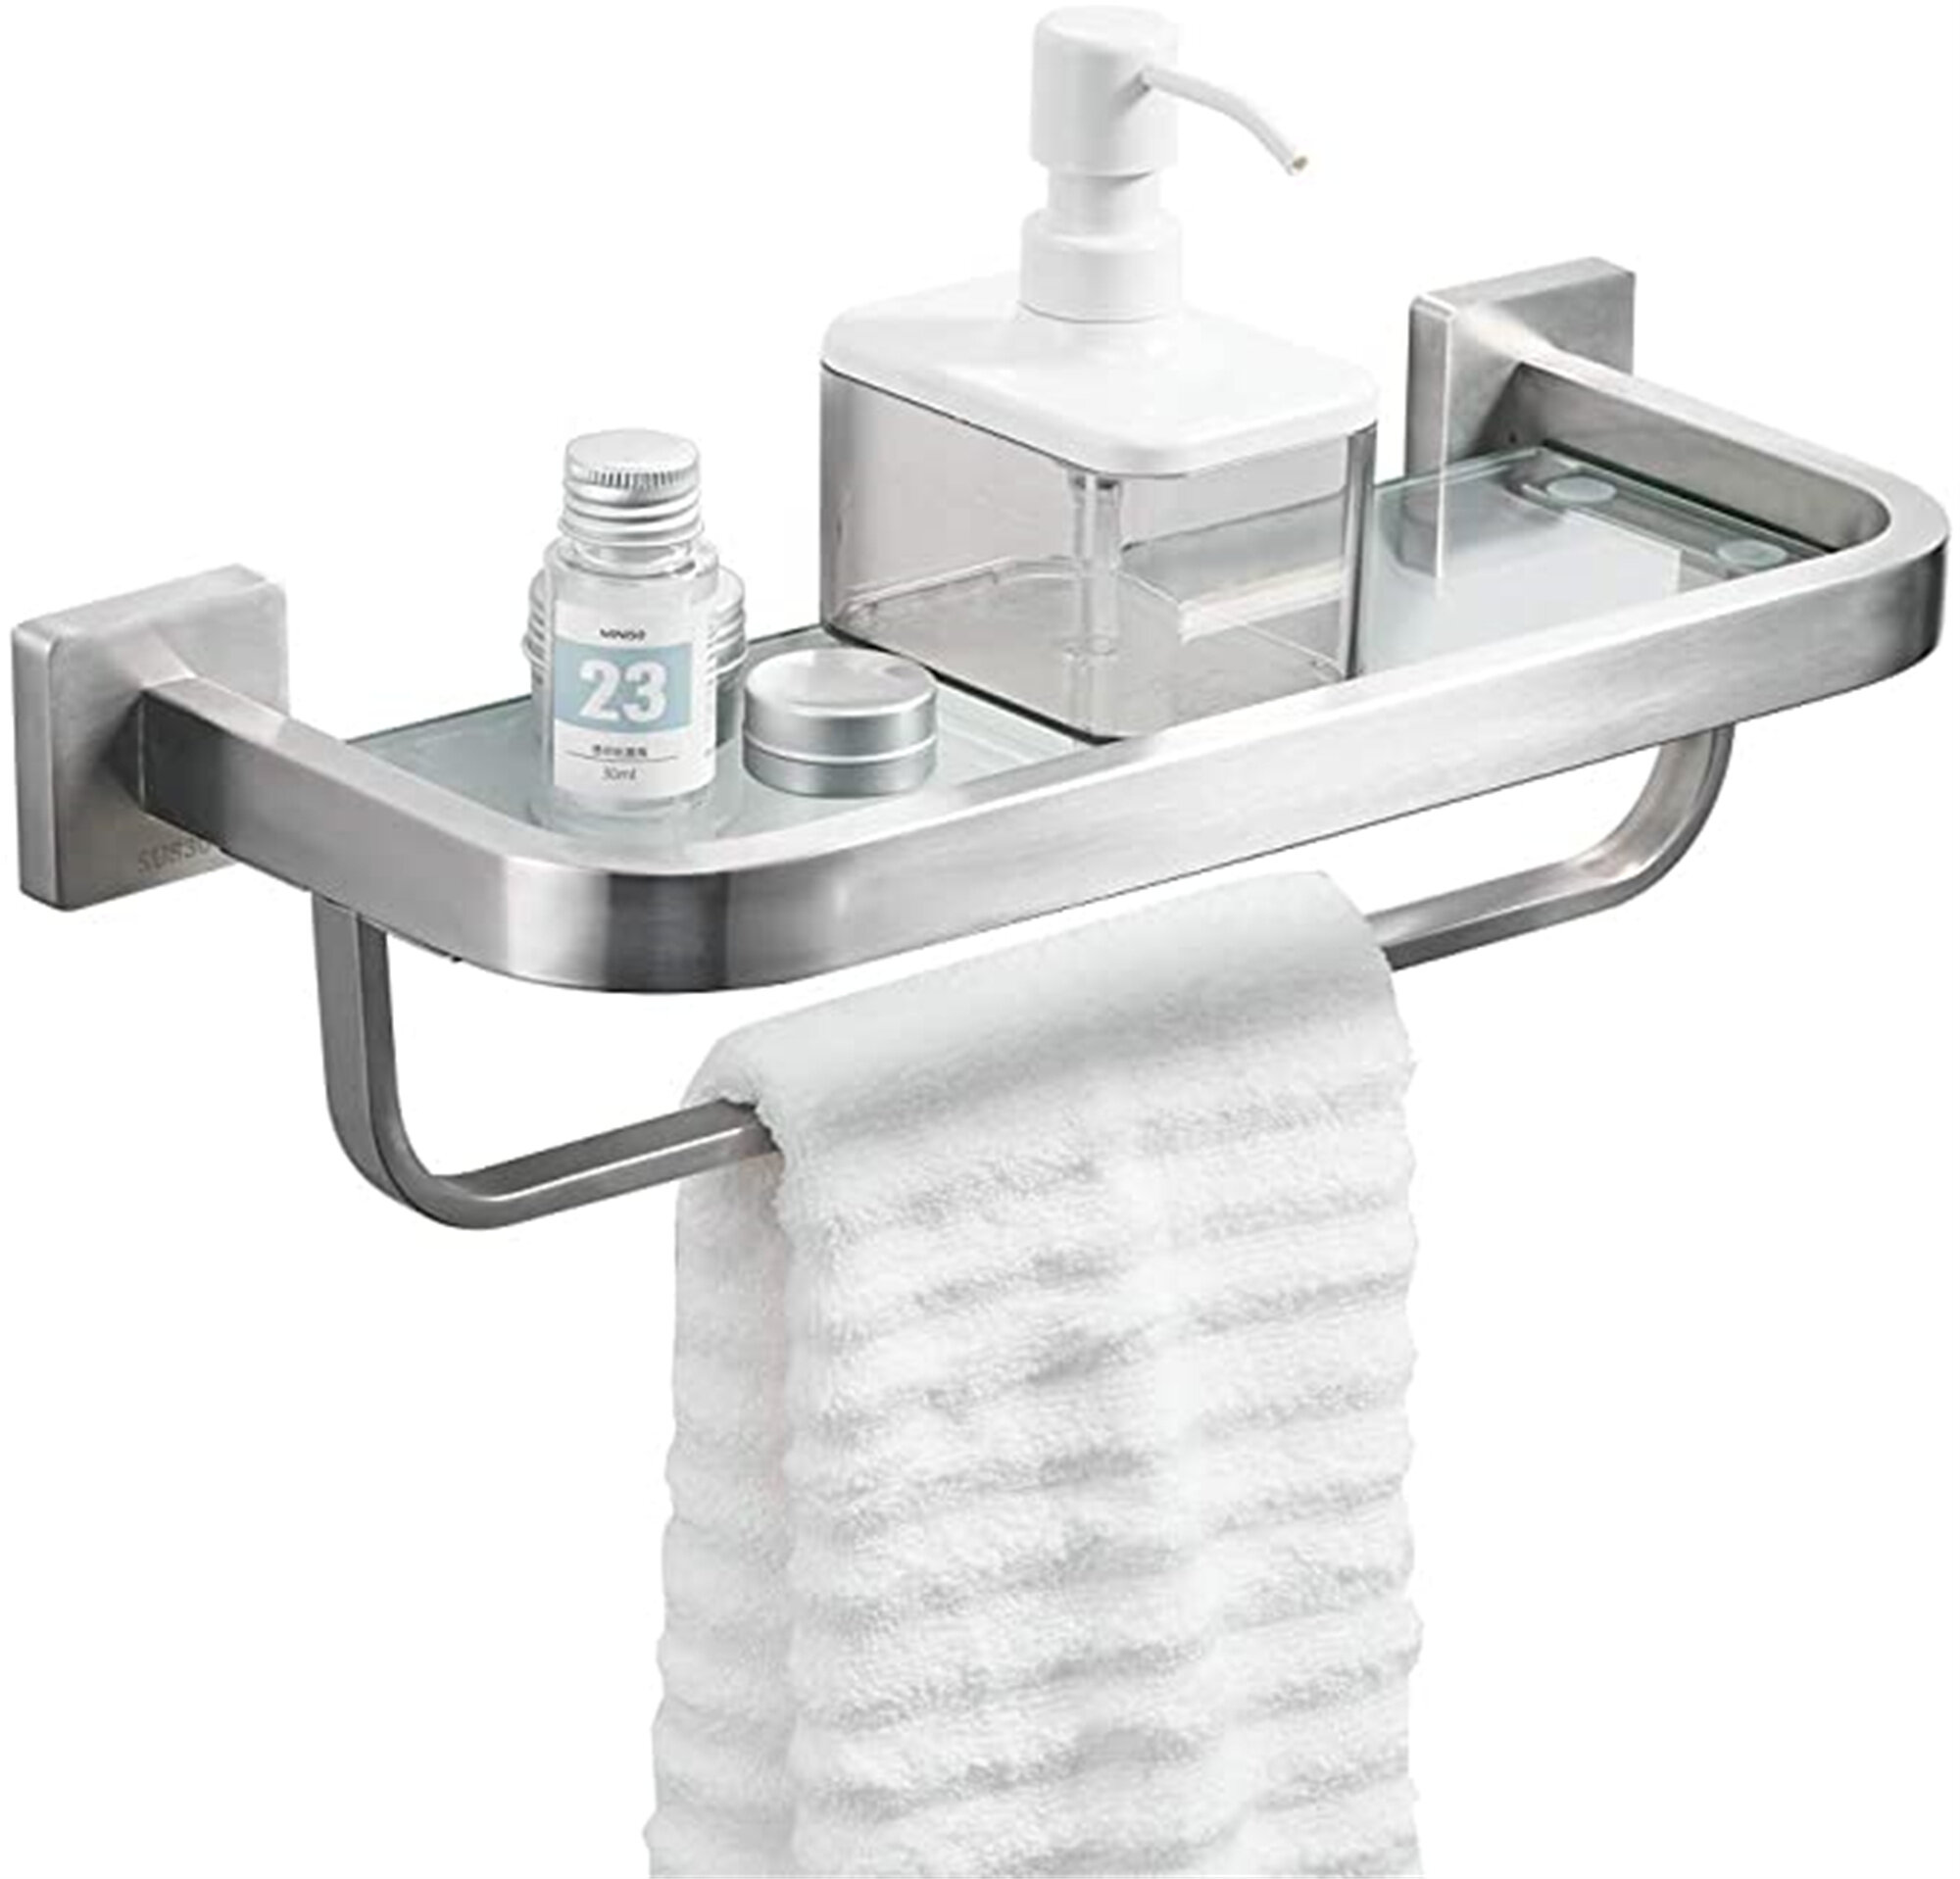 Wall Mounted Bathroom Stainless Steel Soap Storage Holder & Dish Brushed Nickel 